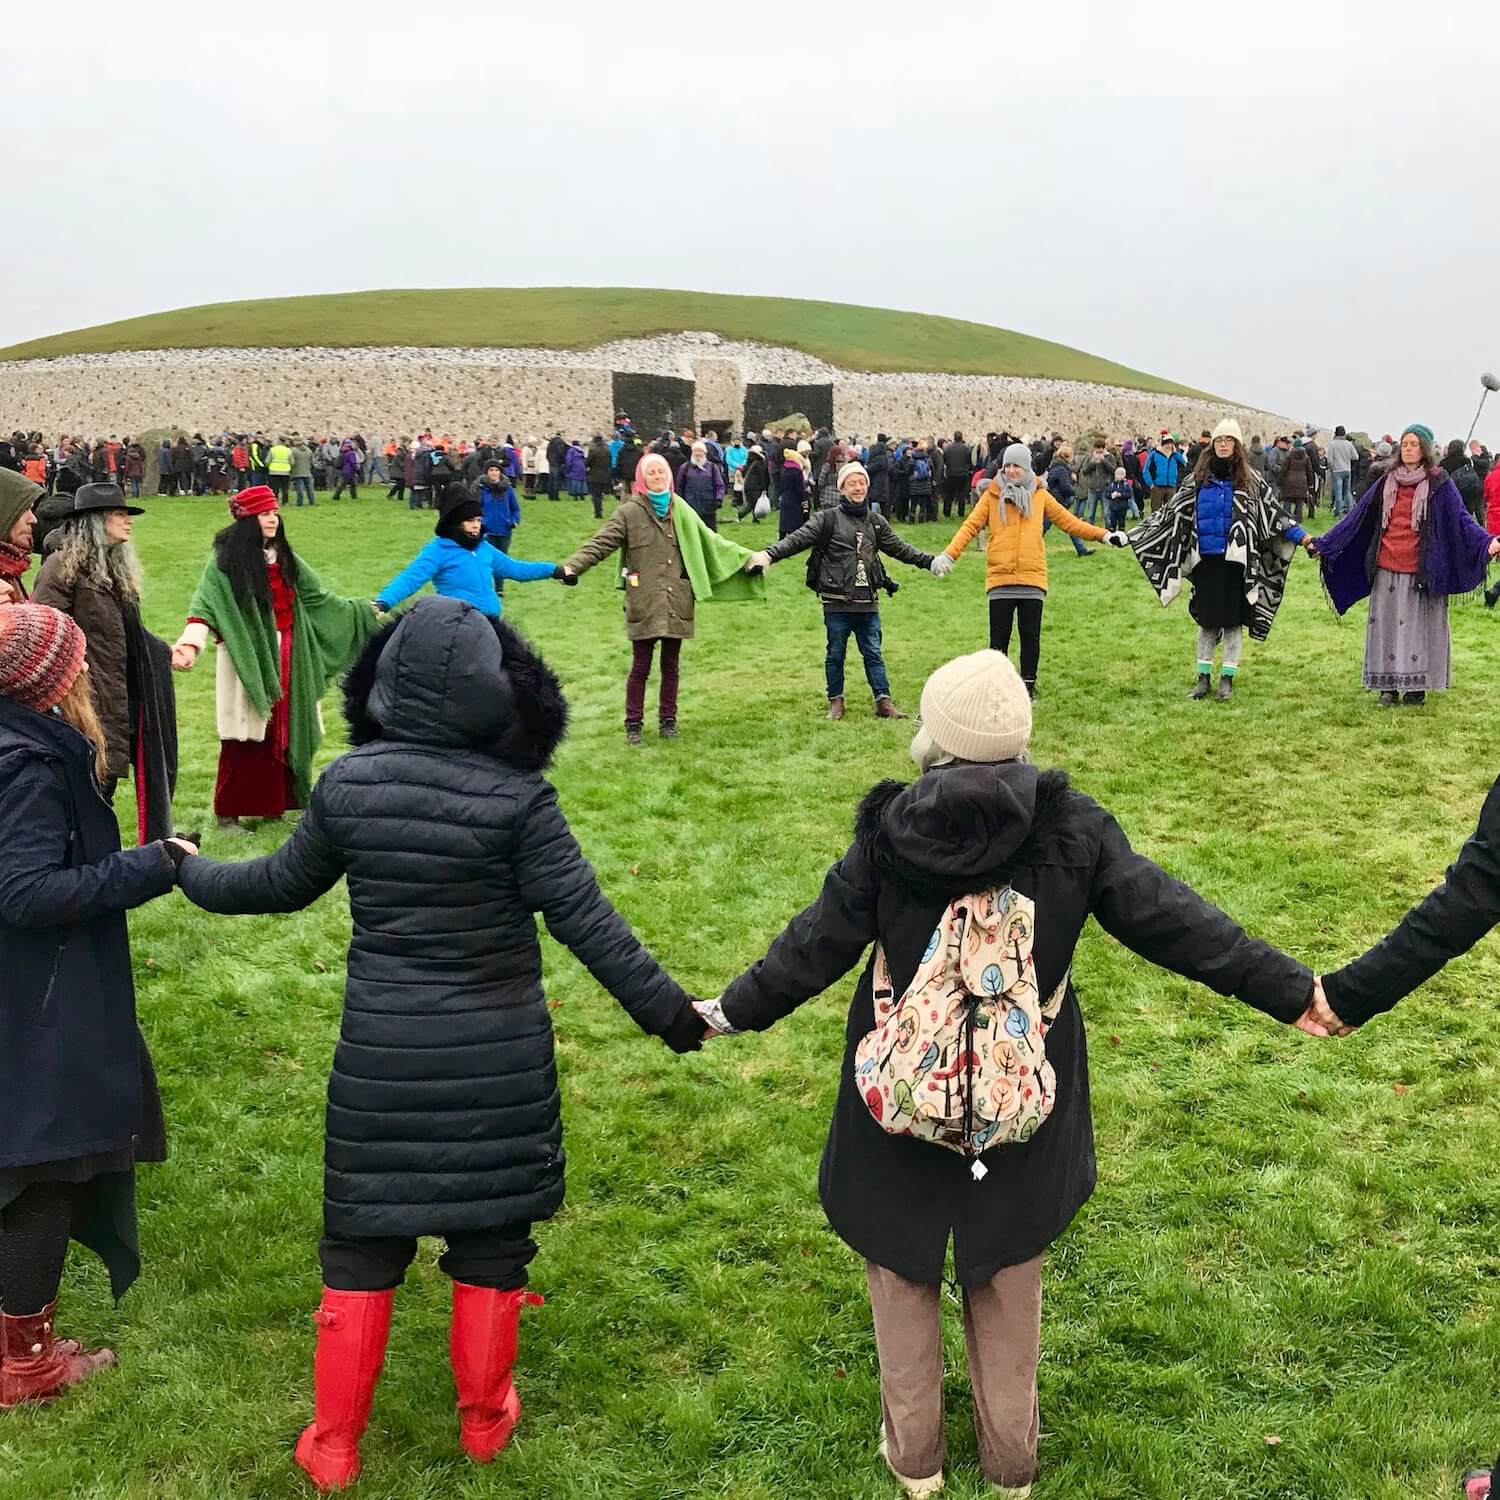 Groups of solstice goers hold hands in circles directly outside the entrance to ancient Newgrange Ireland during the winter solstice.